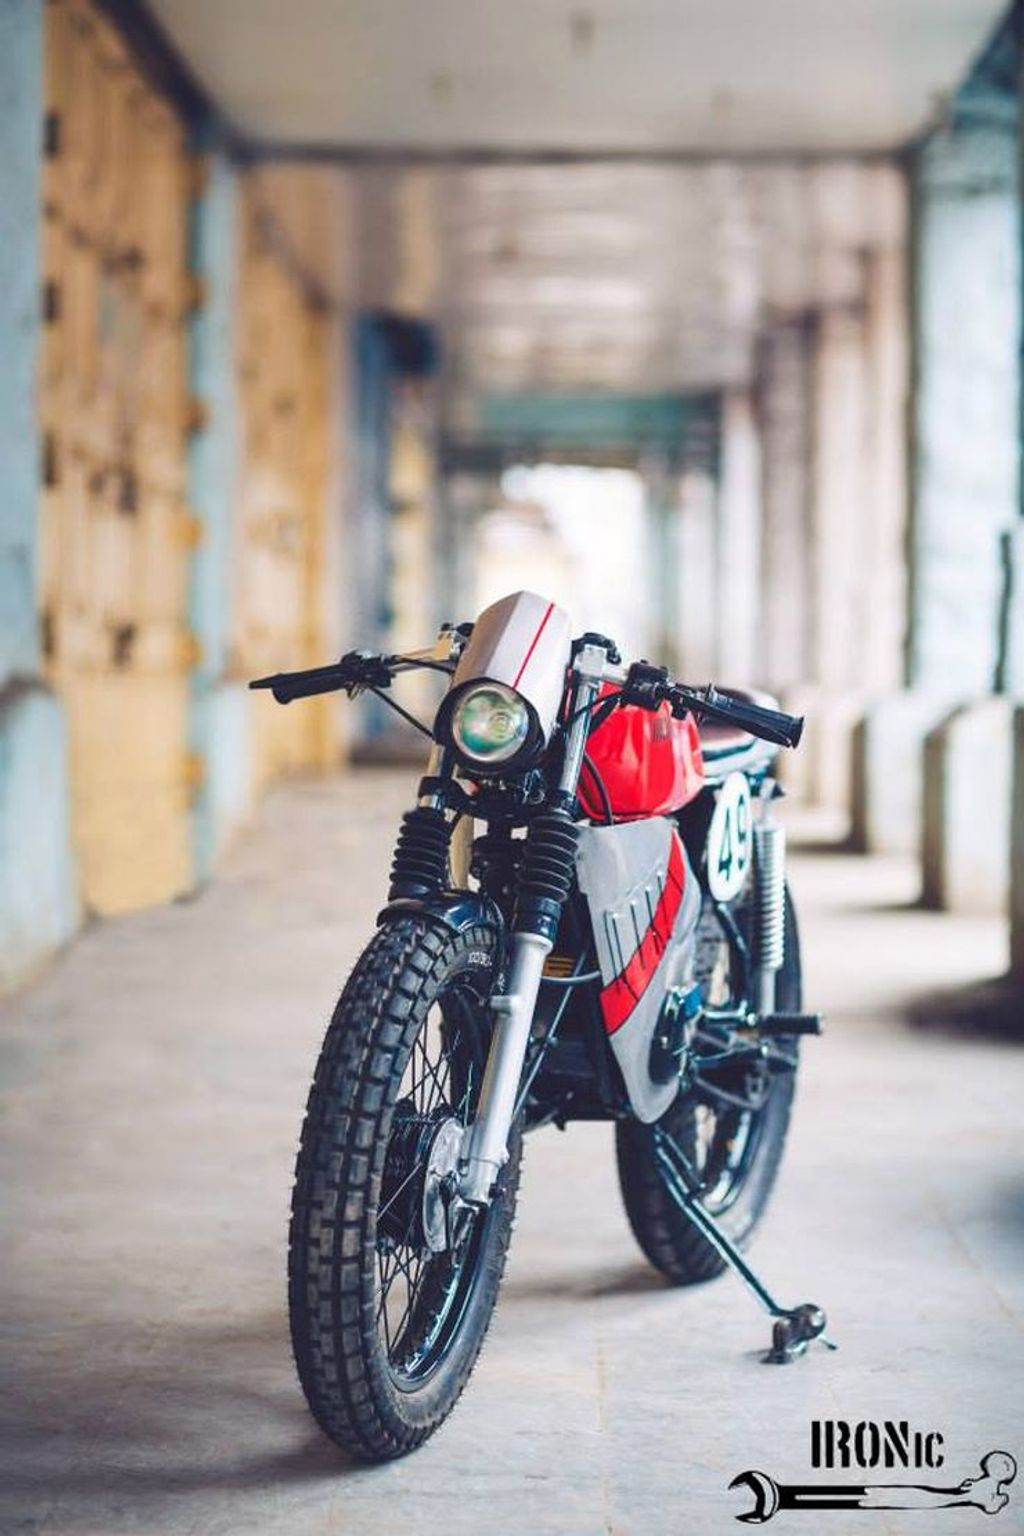 This Modified Yamaha RX100 Café Racer Is Ready For Battle